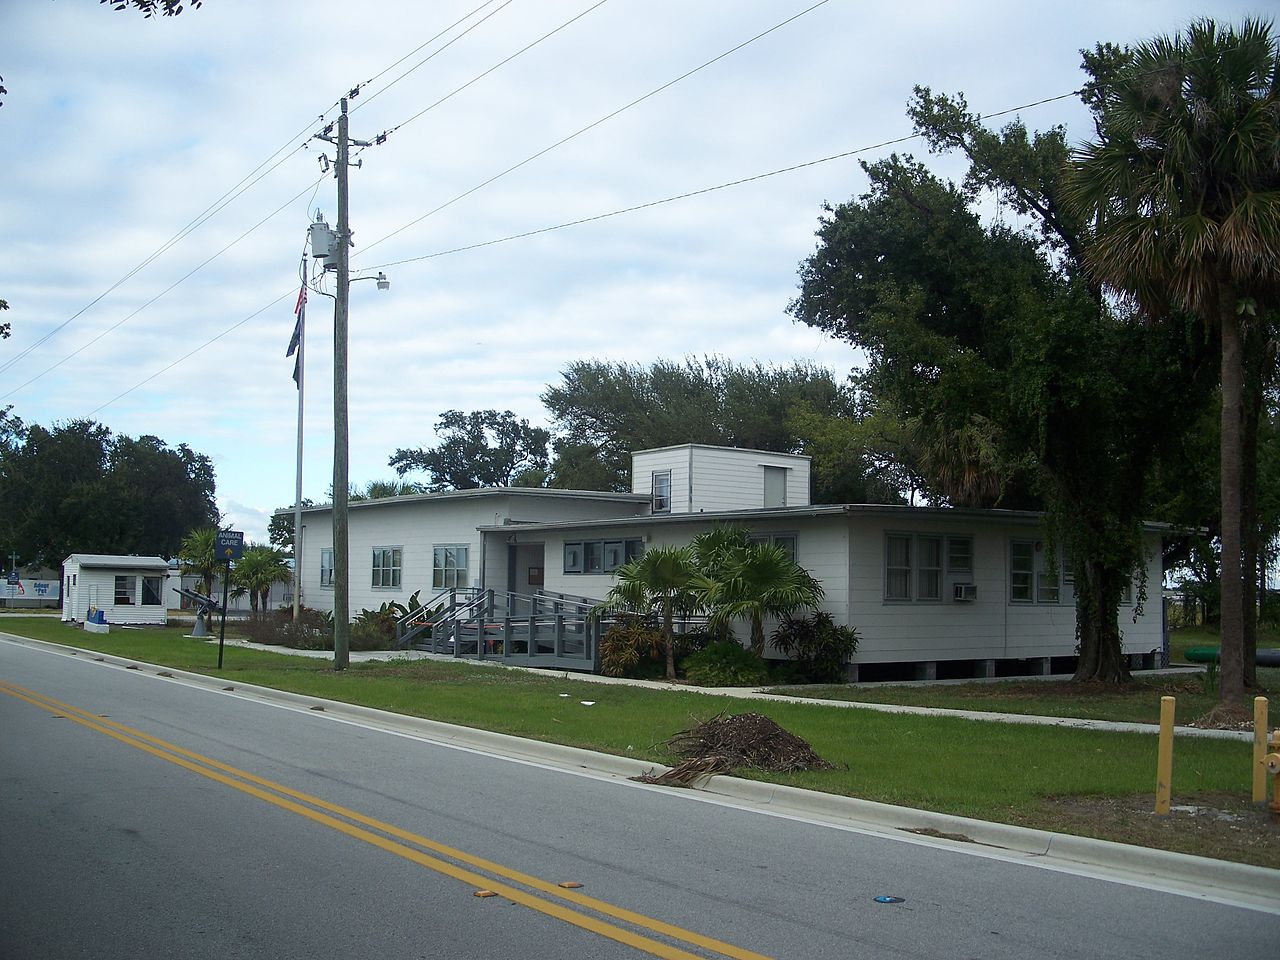 The Naval Air Station Fort Lauderdale Museum is housed in the historic Link Trainer Building, which is the only structure left from the Naval Air Station Fort Lauderdale. 